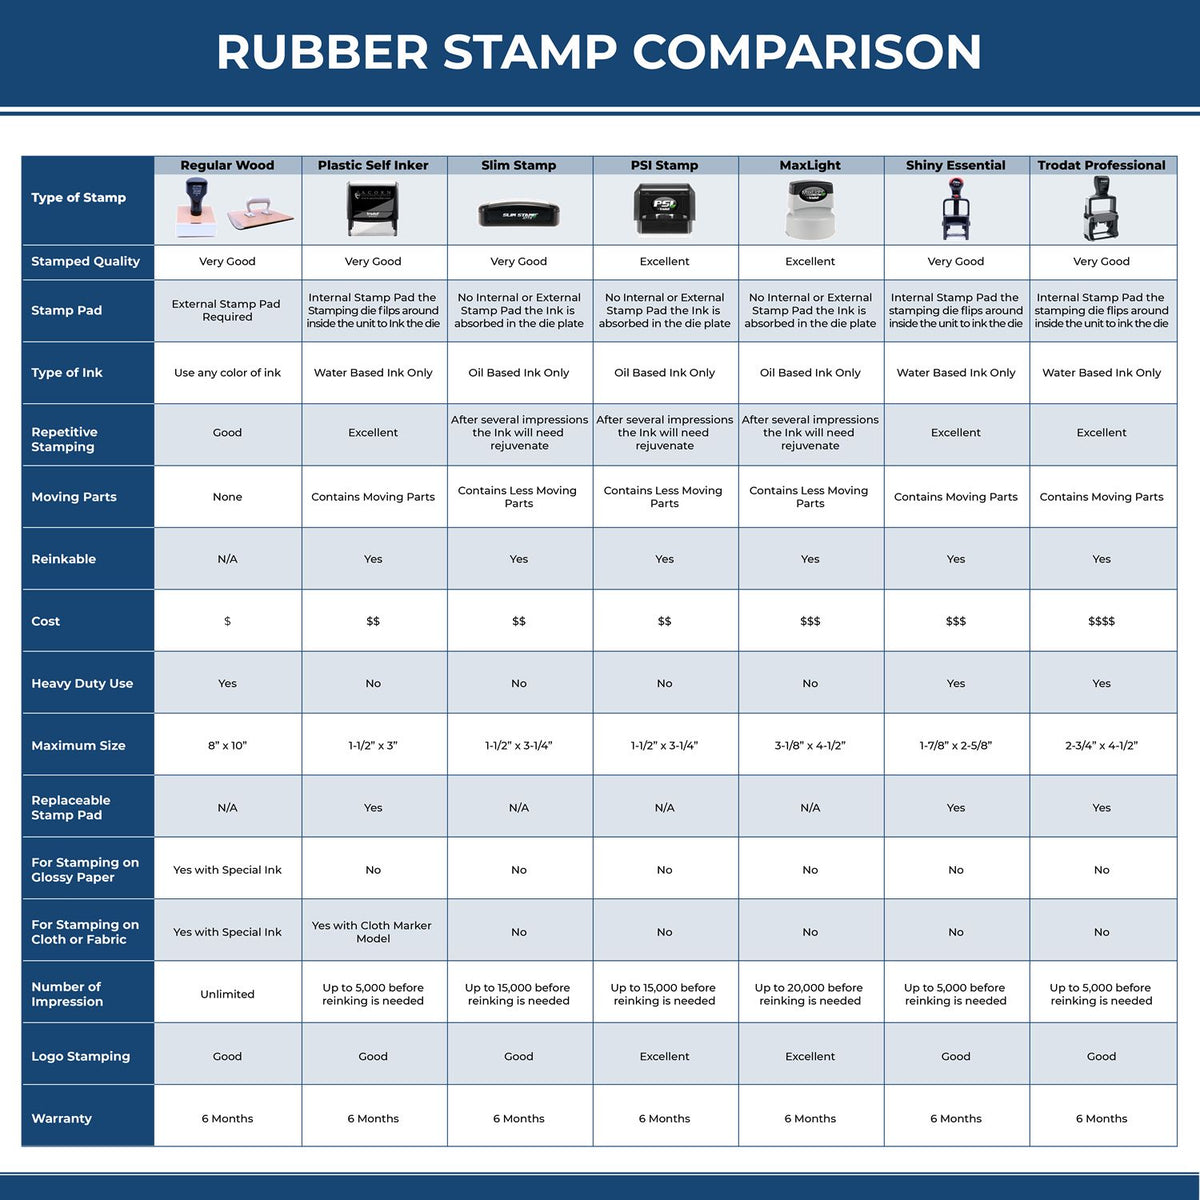 Large First Class Rubber Stamp 4977R Rubber Stamp Comparison